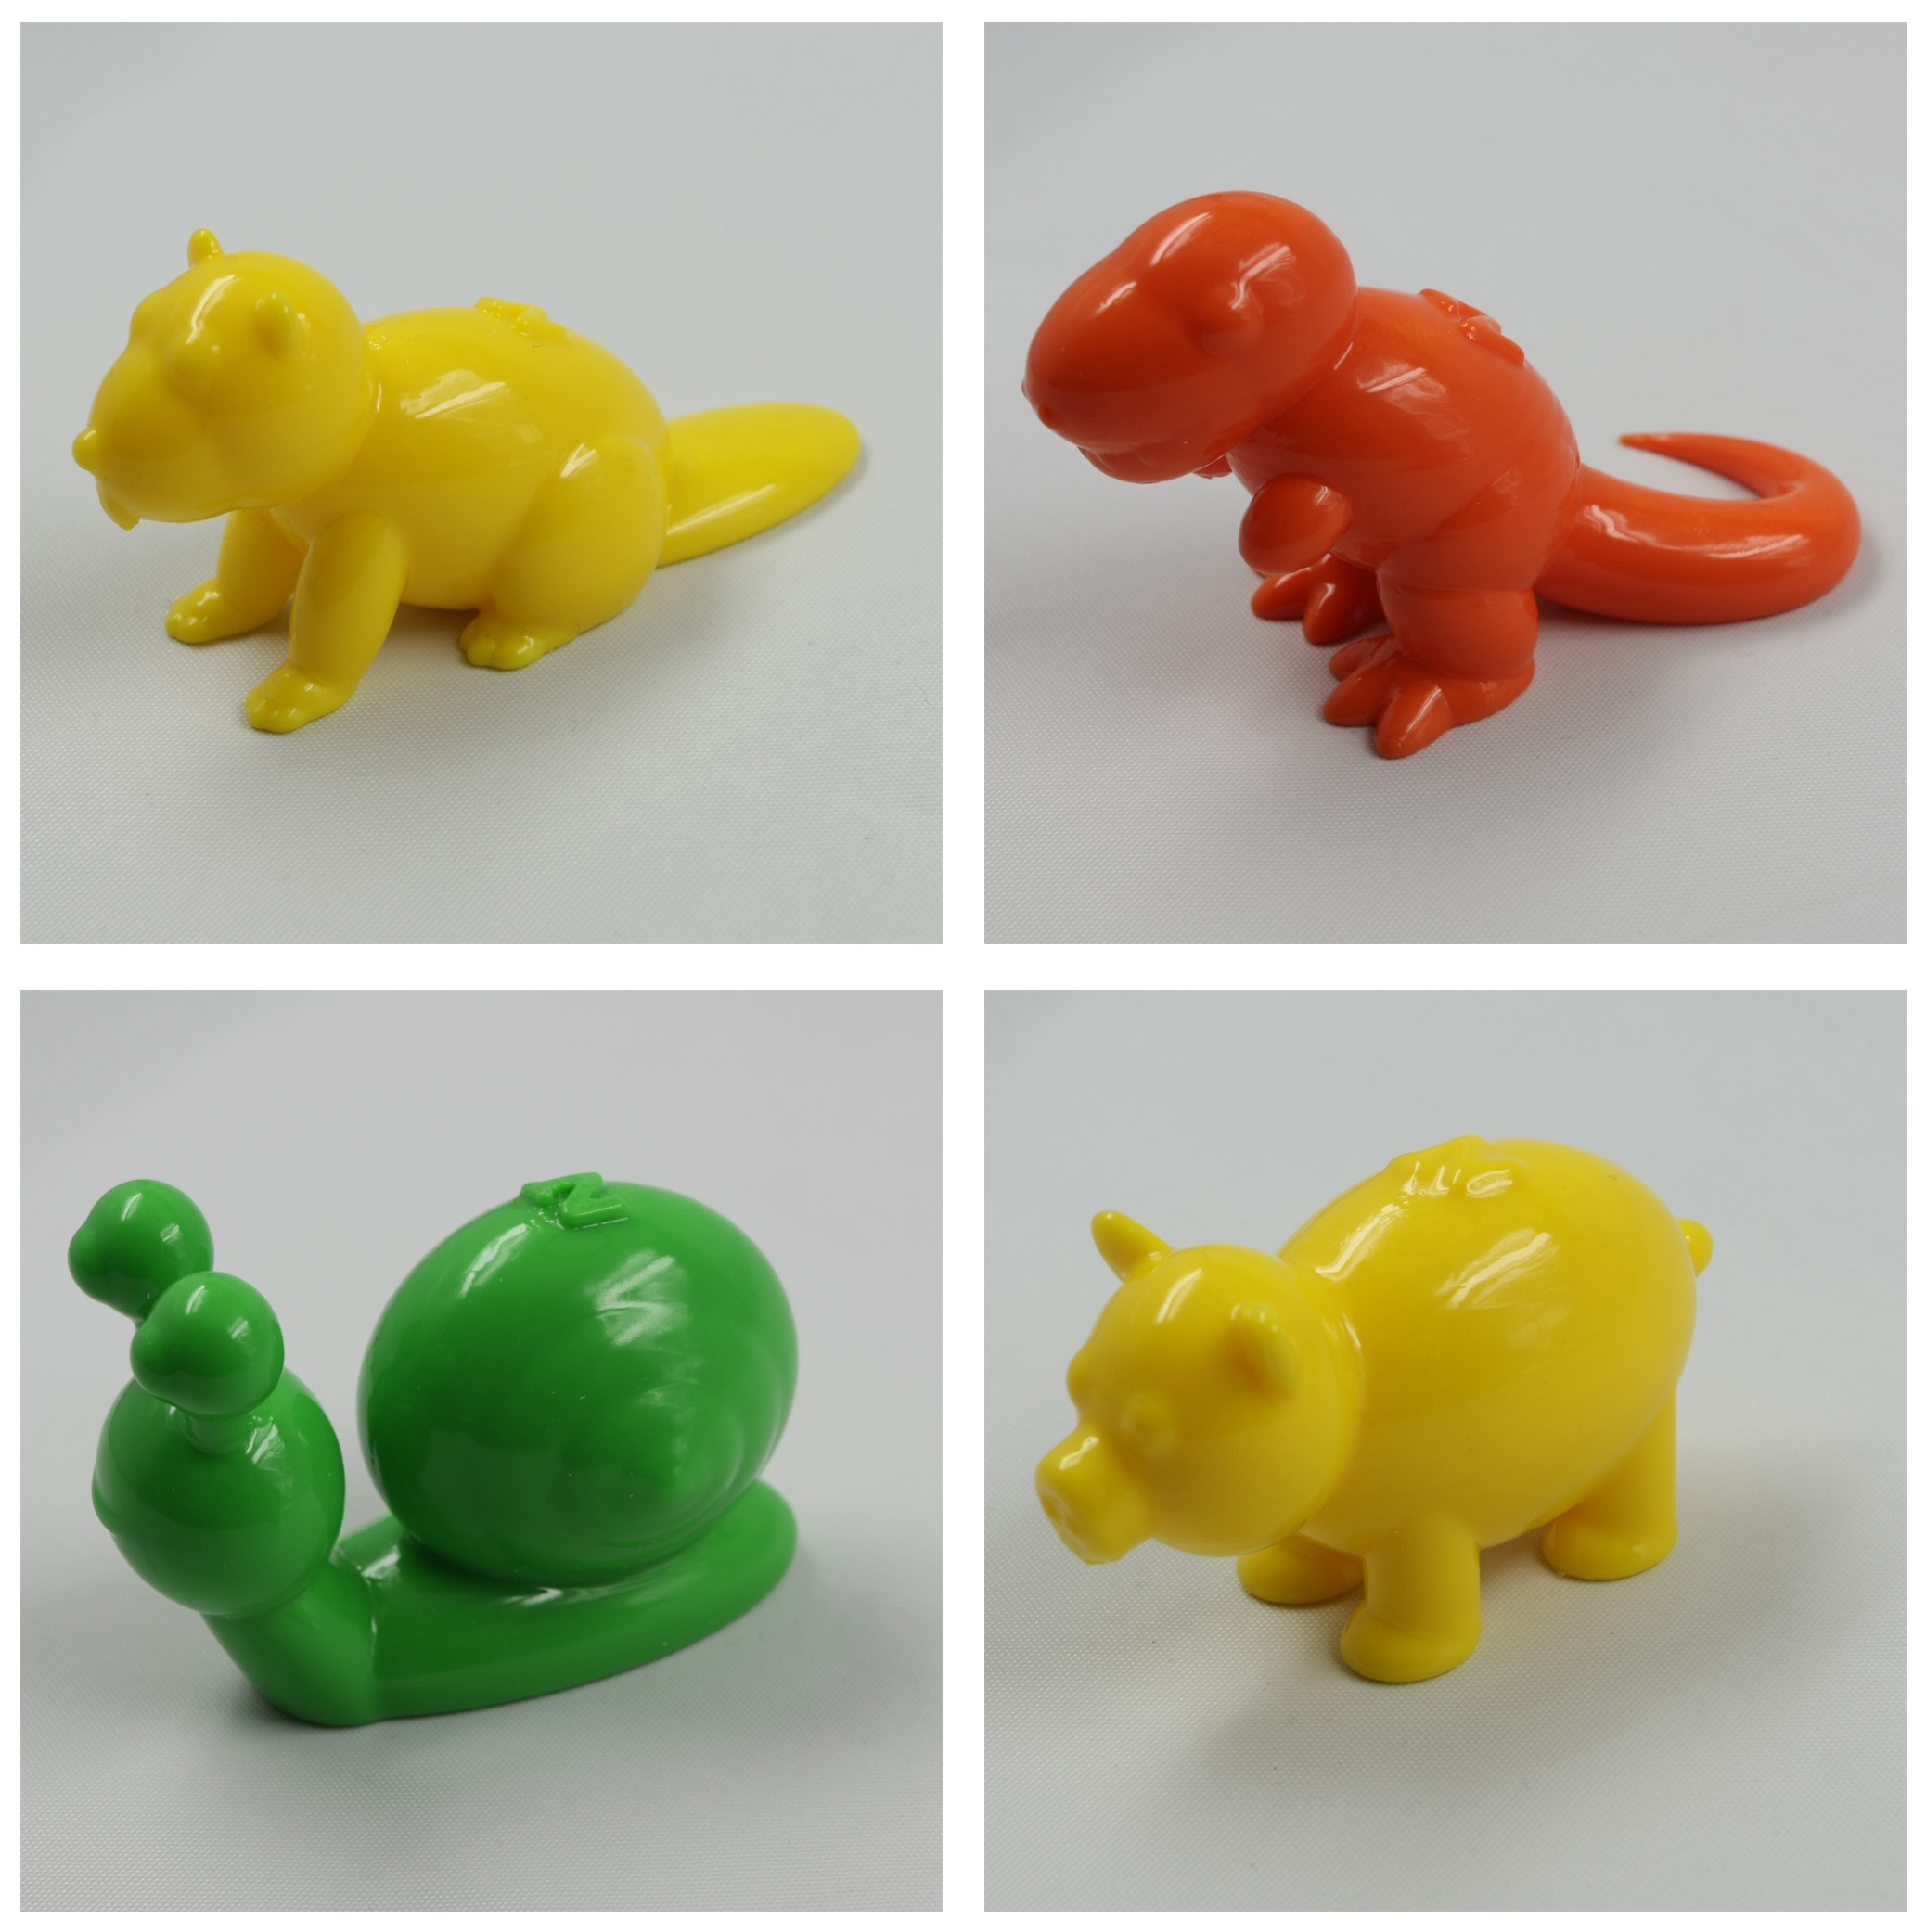  Sample 3D prints from Polymaker's new smoothing process using PolySmooth filament and the PolySher smoothing system 